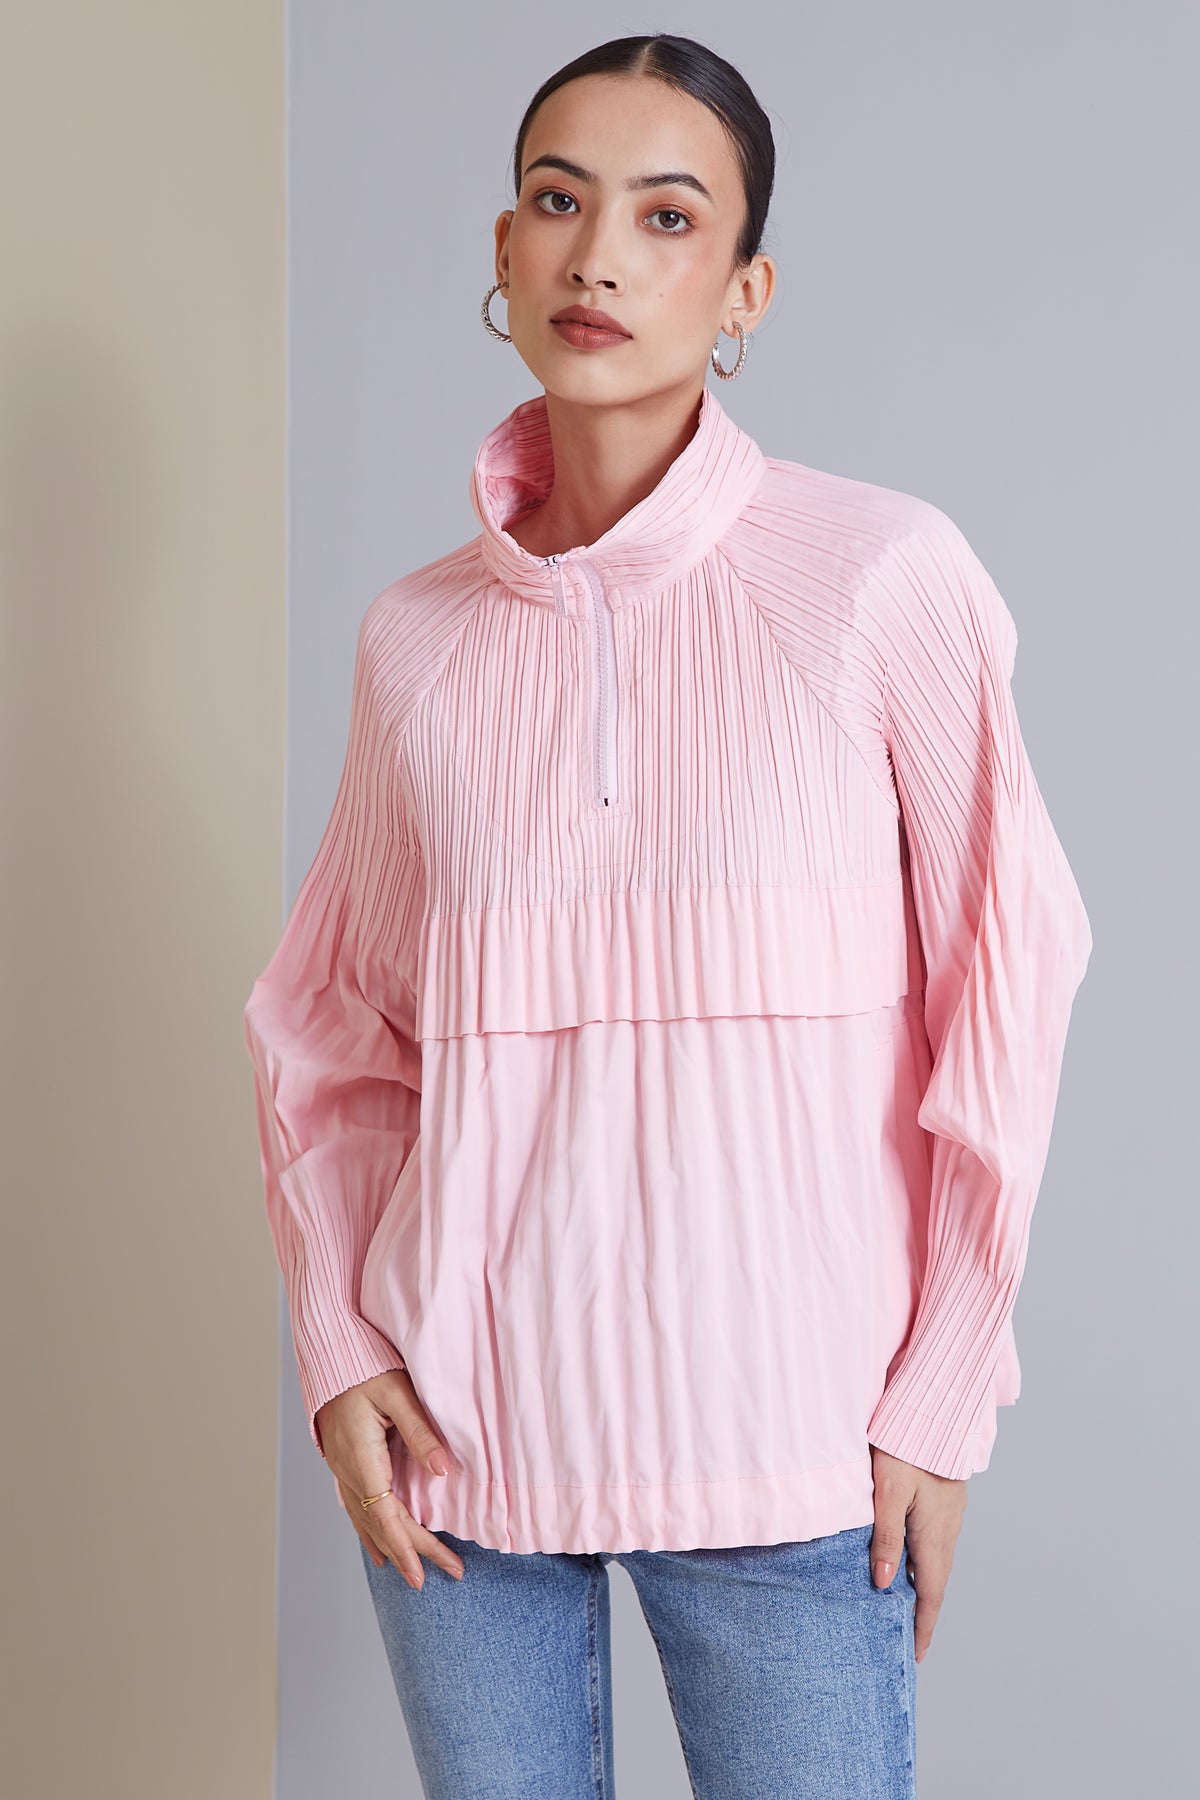 Odette Polo Top - Light Pink